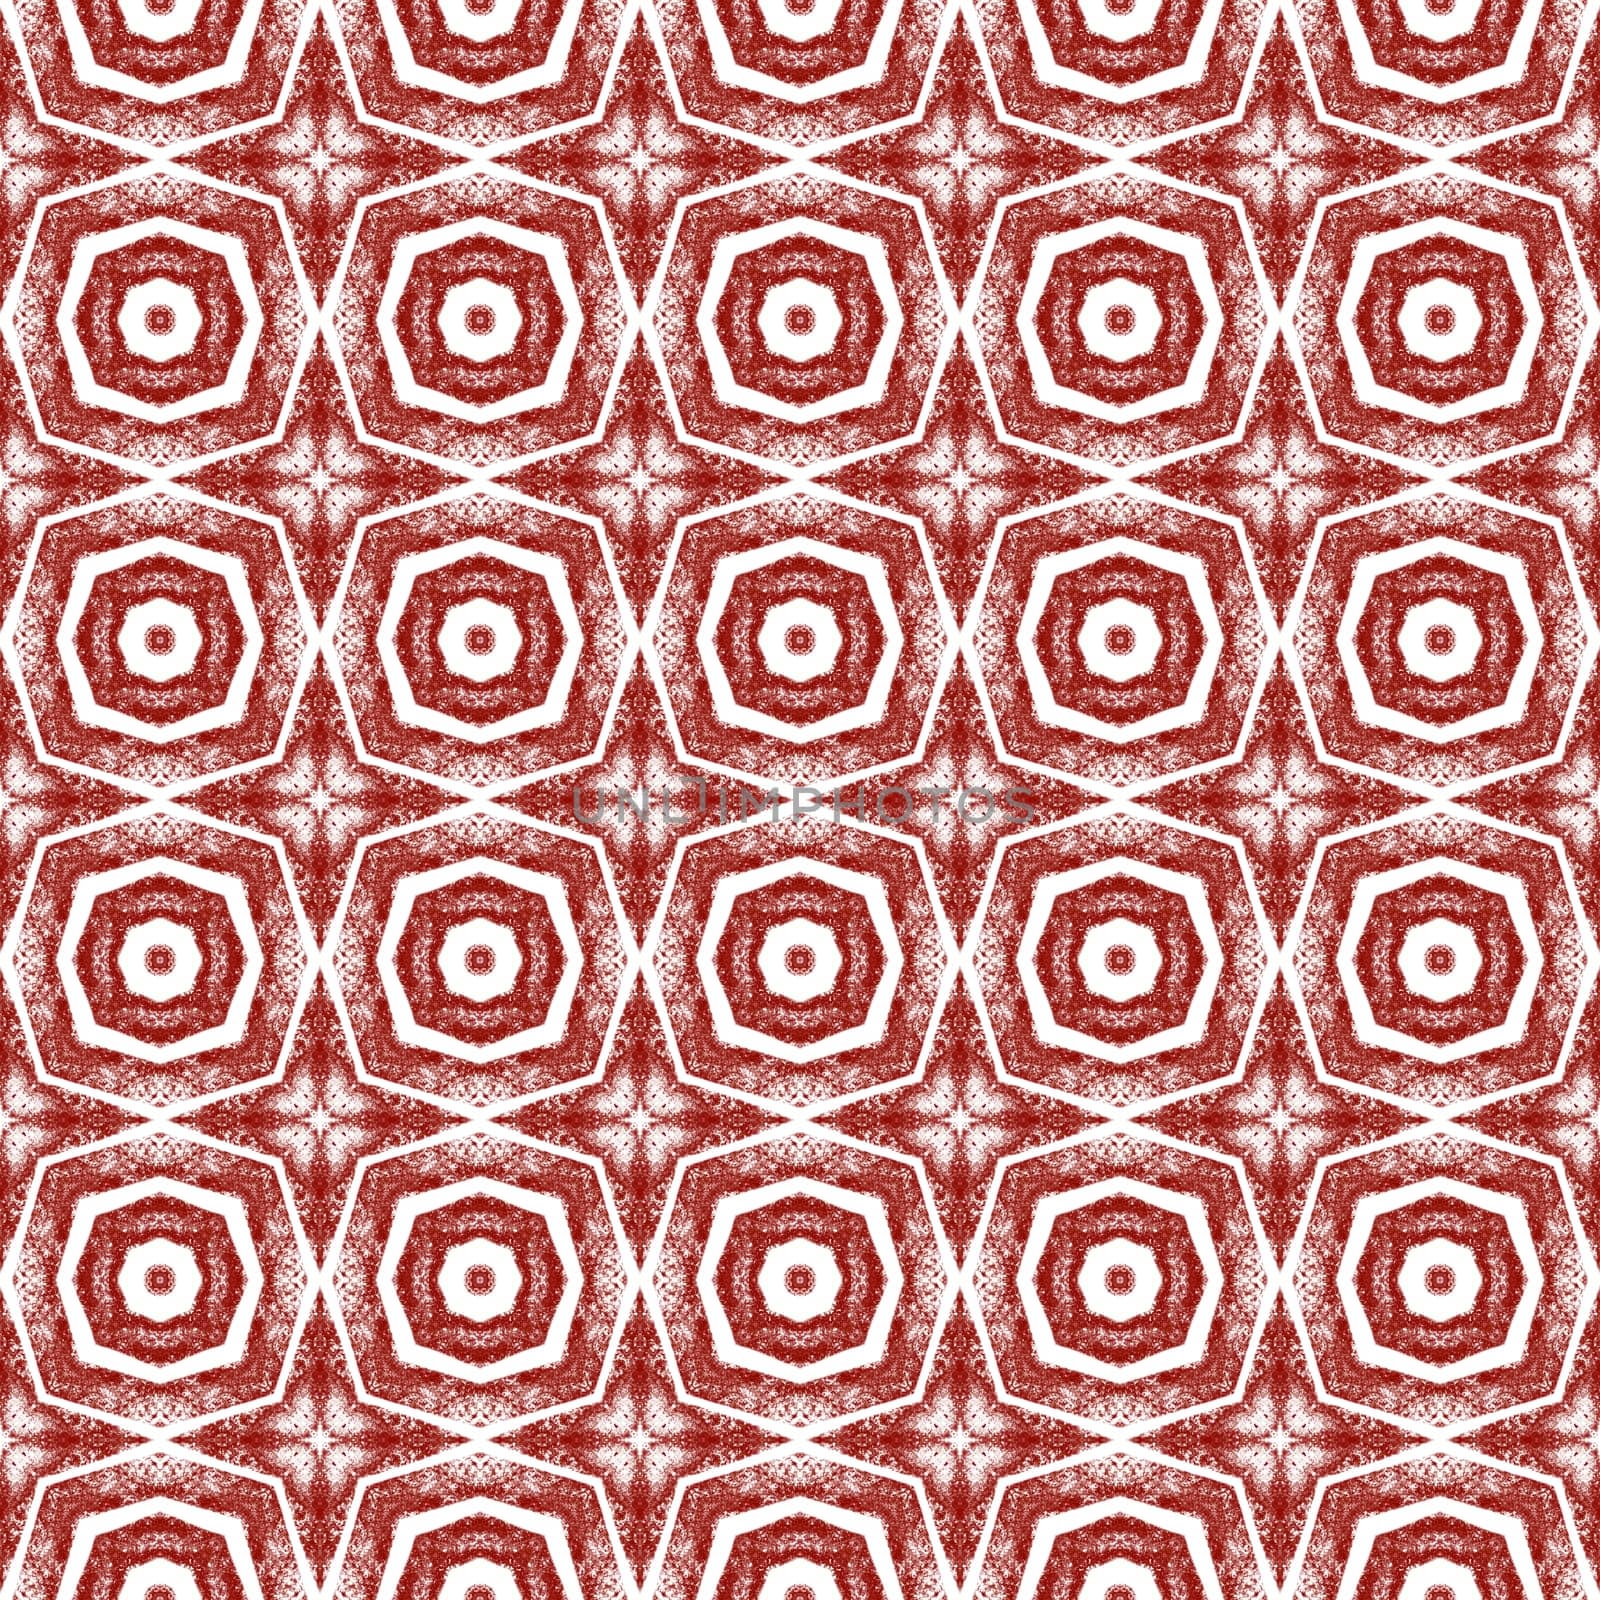 Ethnic hand painted pattern. Maroon symmetrical kaleidoscope background. Summer dress ethnic hand painted tile. Textile ready symmetrical print, swimwear fabric, wallpaper, wrapping.